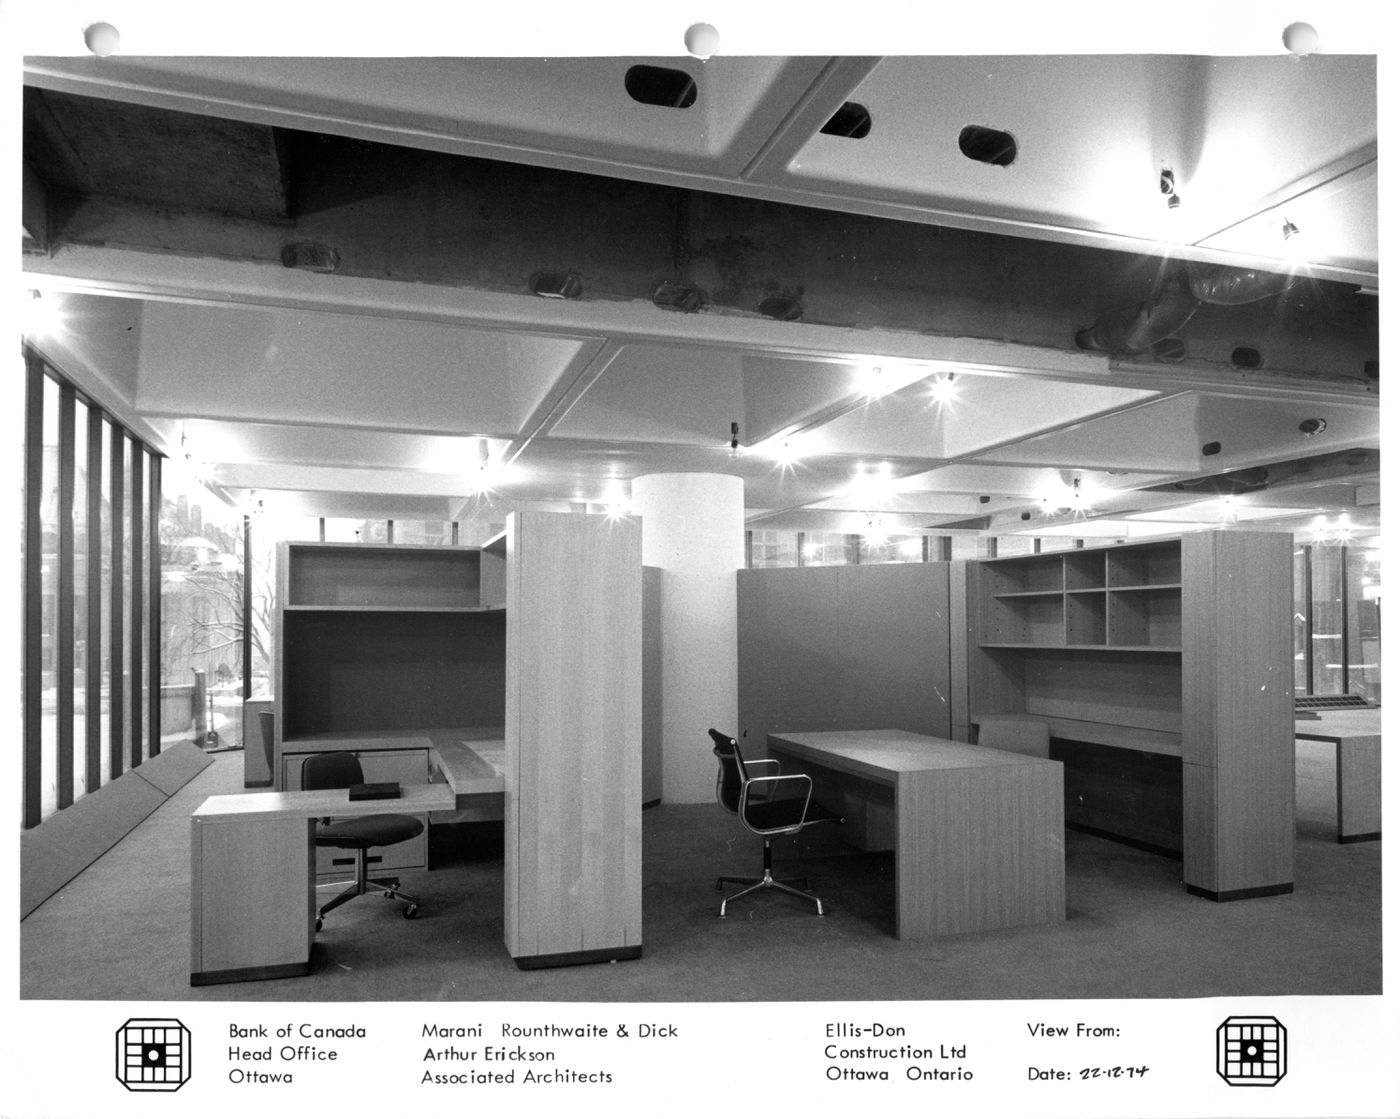 Construction photographs and interiors of the Bank of Canada